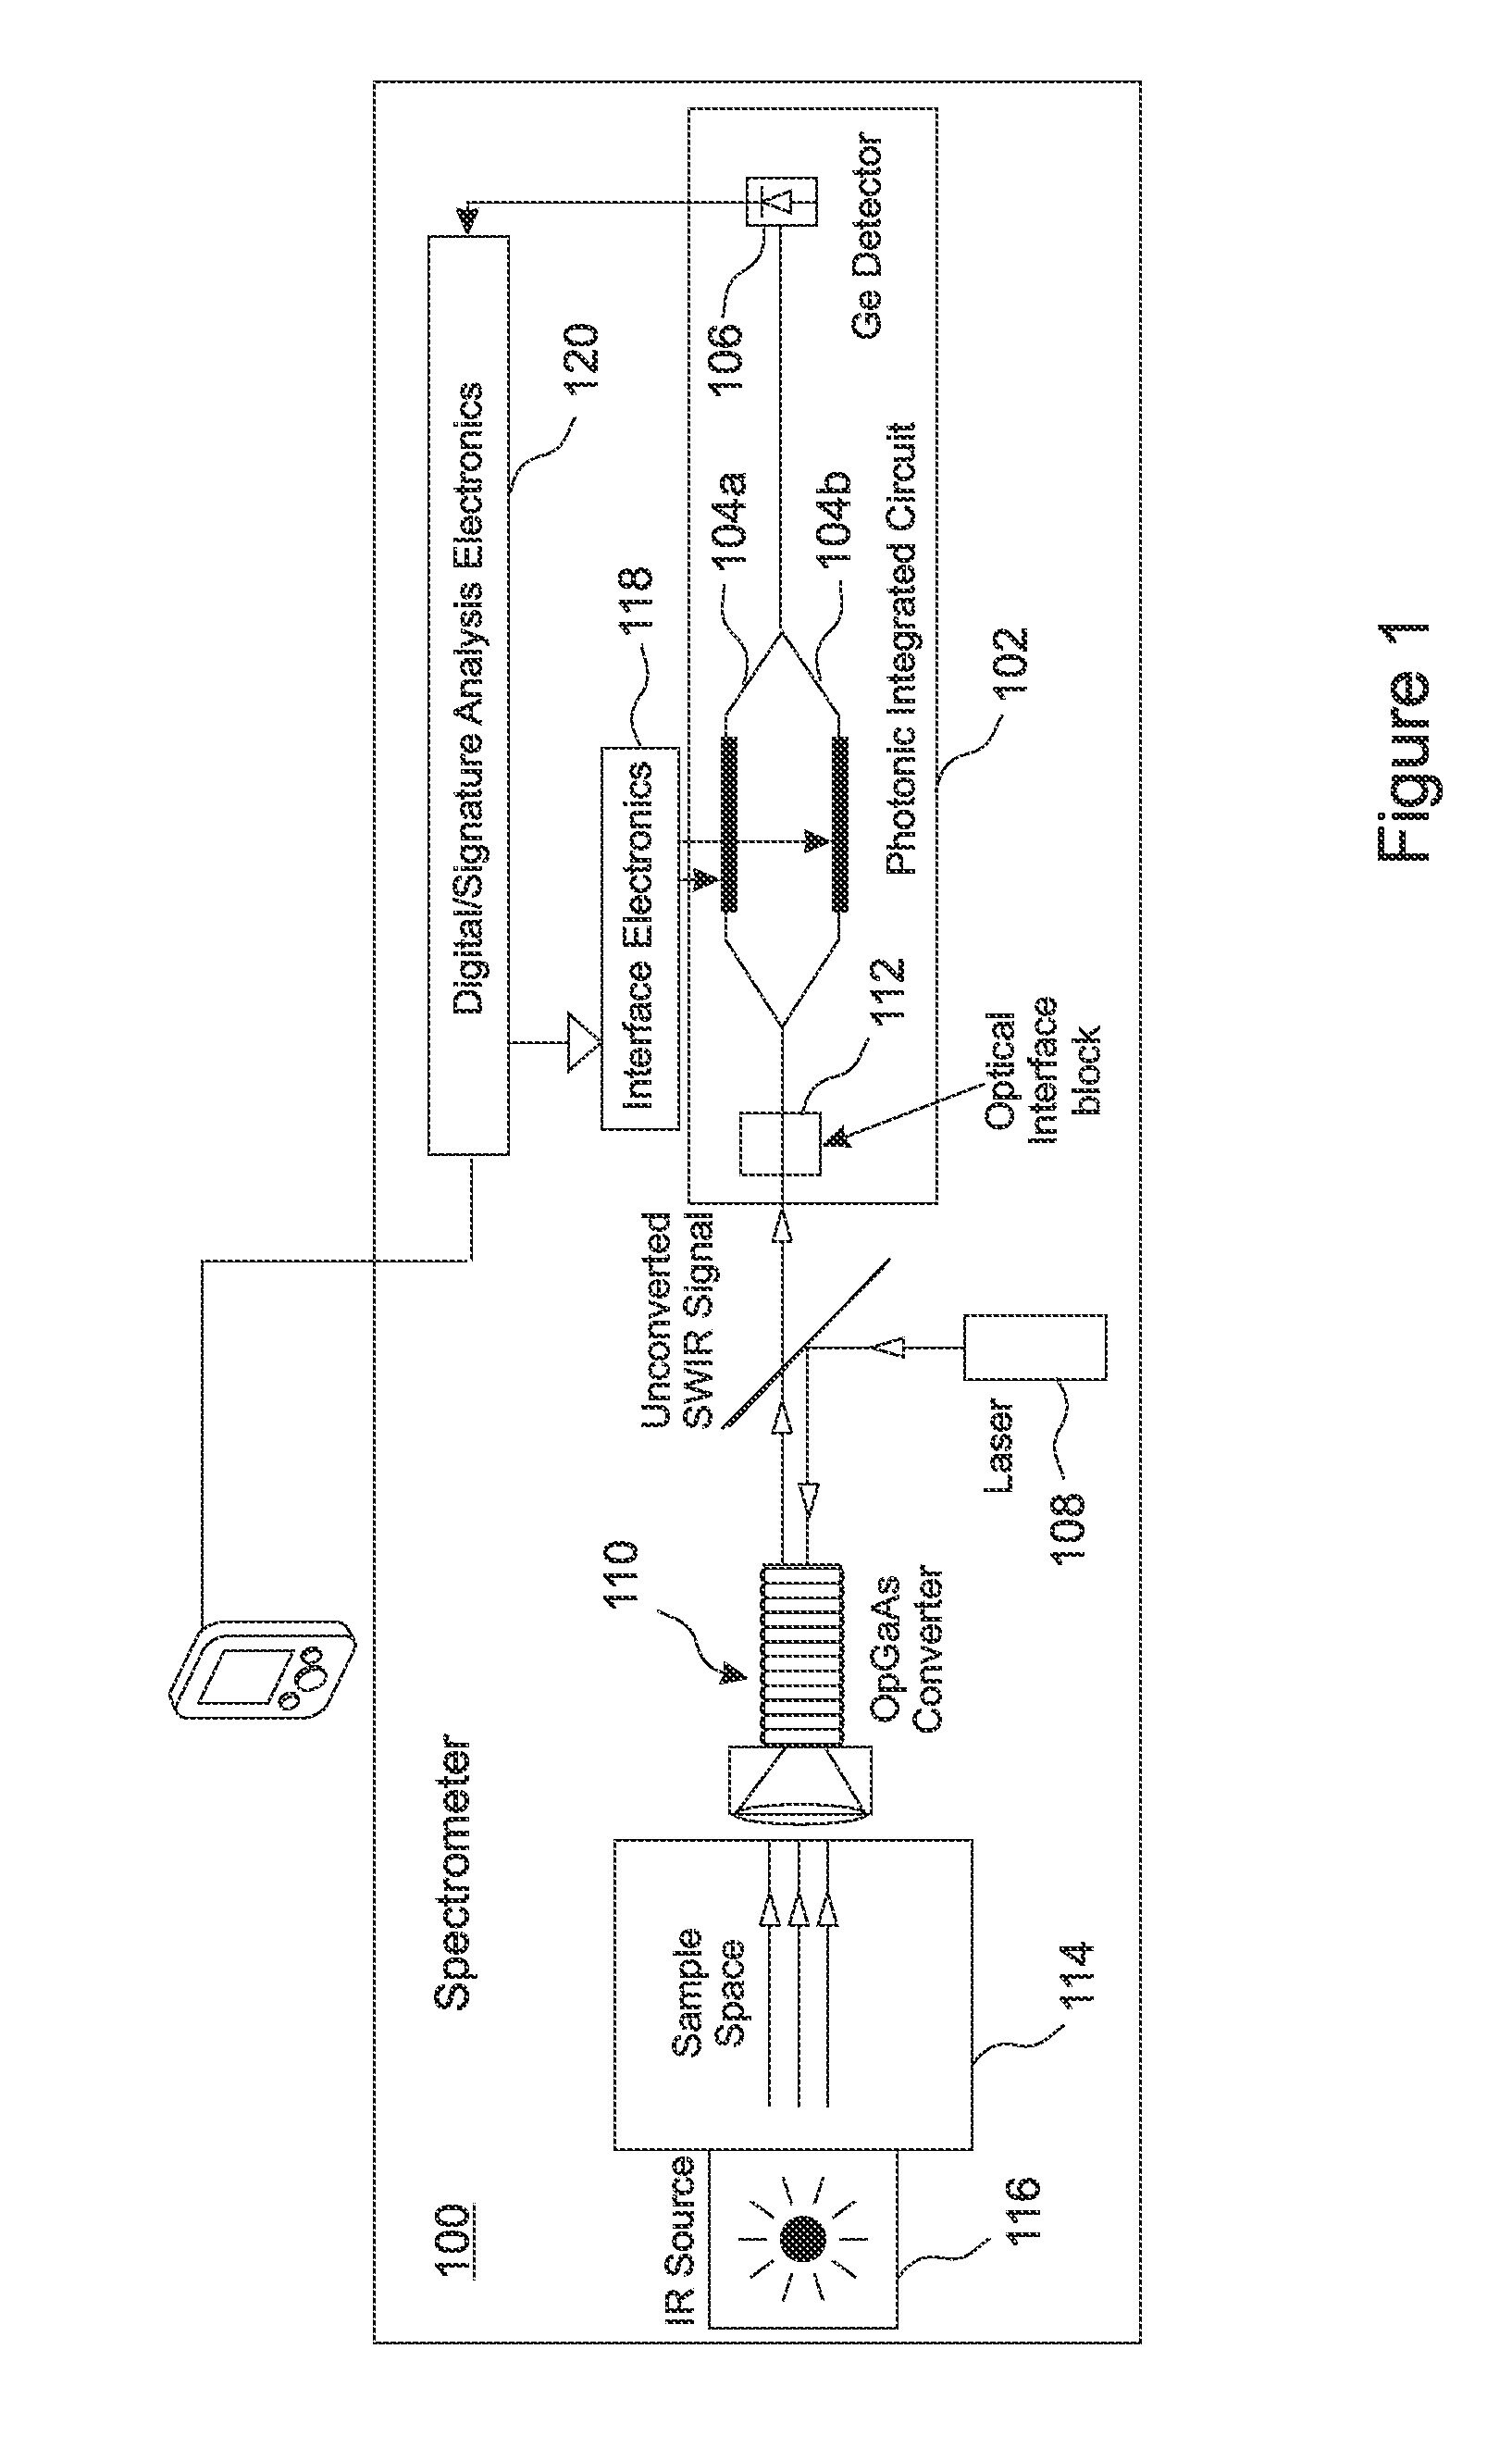 Solid state wideband fourier transform infrared spectrometer